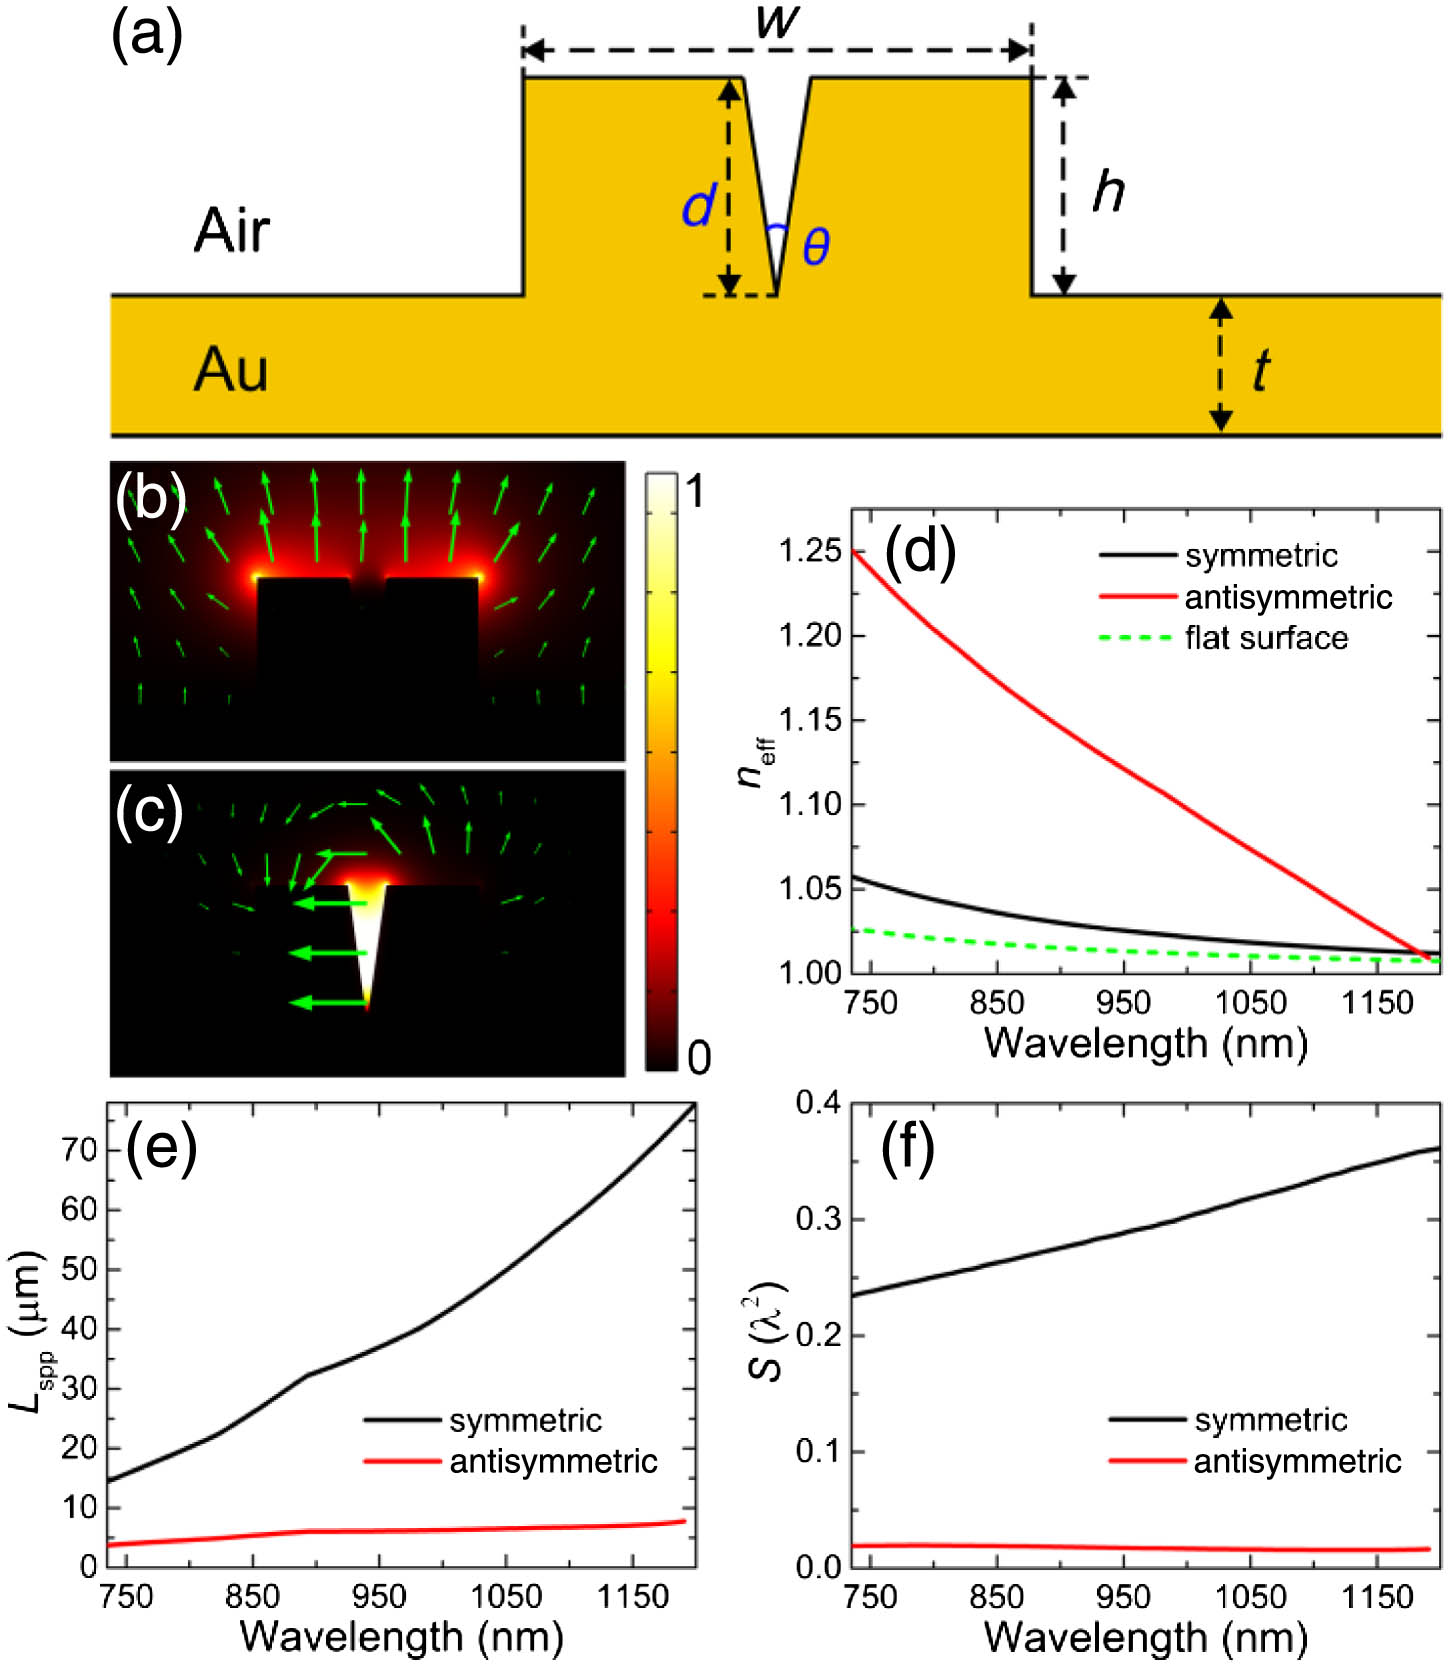 (a) Schematic and geometrical parameters of the multimode plasmonic waveguide. Power flow distributions of the (b) symmetric waveguide mode and (c) antisymmetric waveguide mode for w=700 nm, h=400 nm, d=400 nm, θ=16°, t=200 nm, and r=5 nm. The green arrows denote the vectors of the electric field. (d) Effective refractive indices, (e) propagation lengths, and (f) field confinements of the symmetric (black lines) as well as antisymmetric (red lines) SPP waveguide modes varying with wavelengths. The green dashed line in (d) denotes the effective refractive indices of the SPP mode on the flat metal surface.